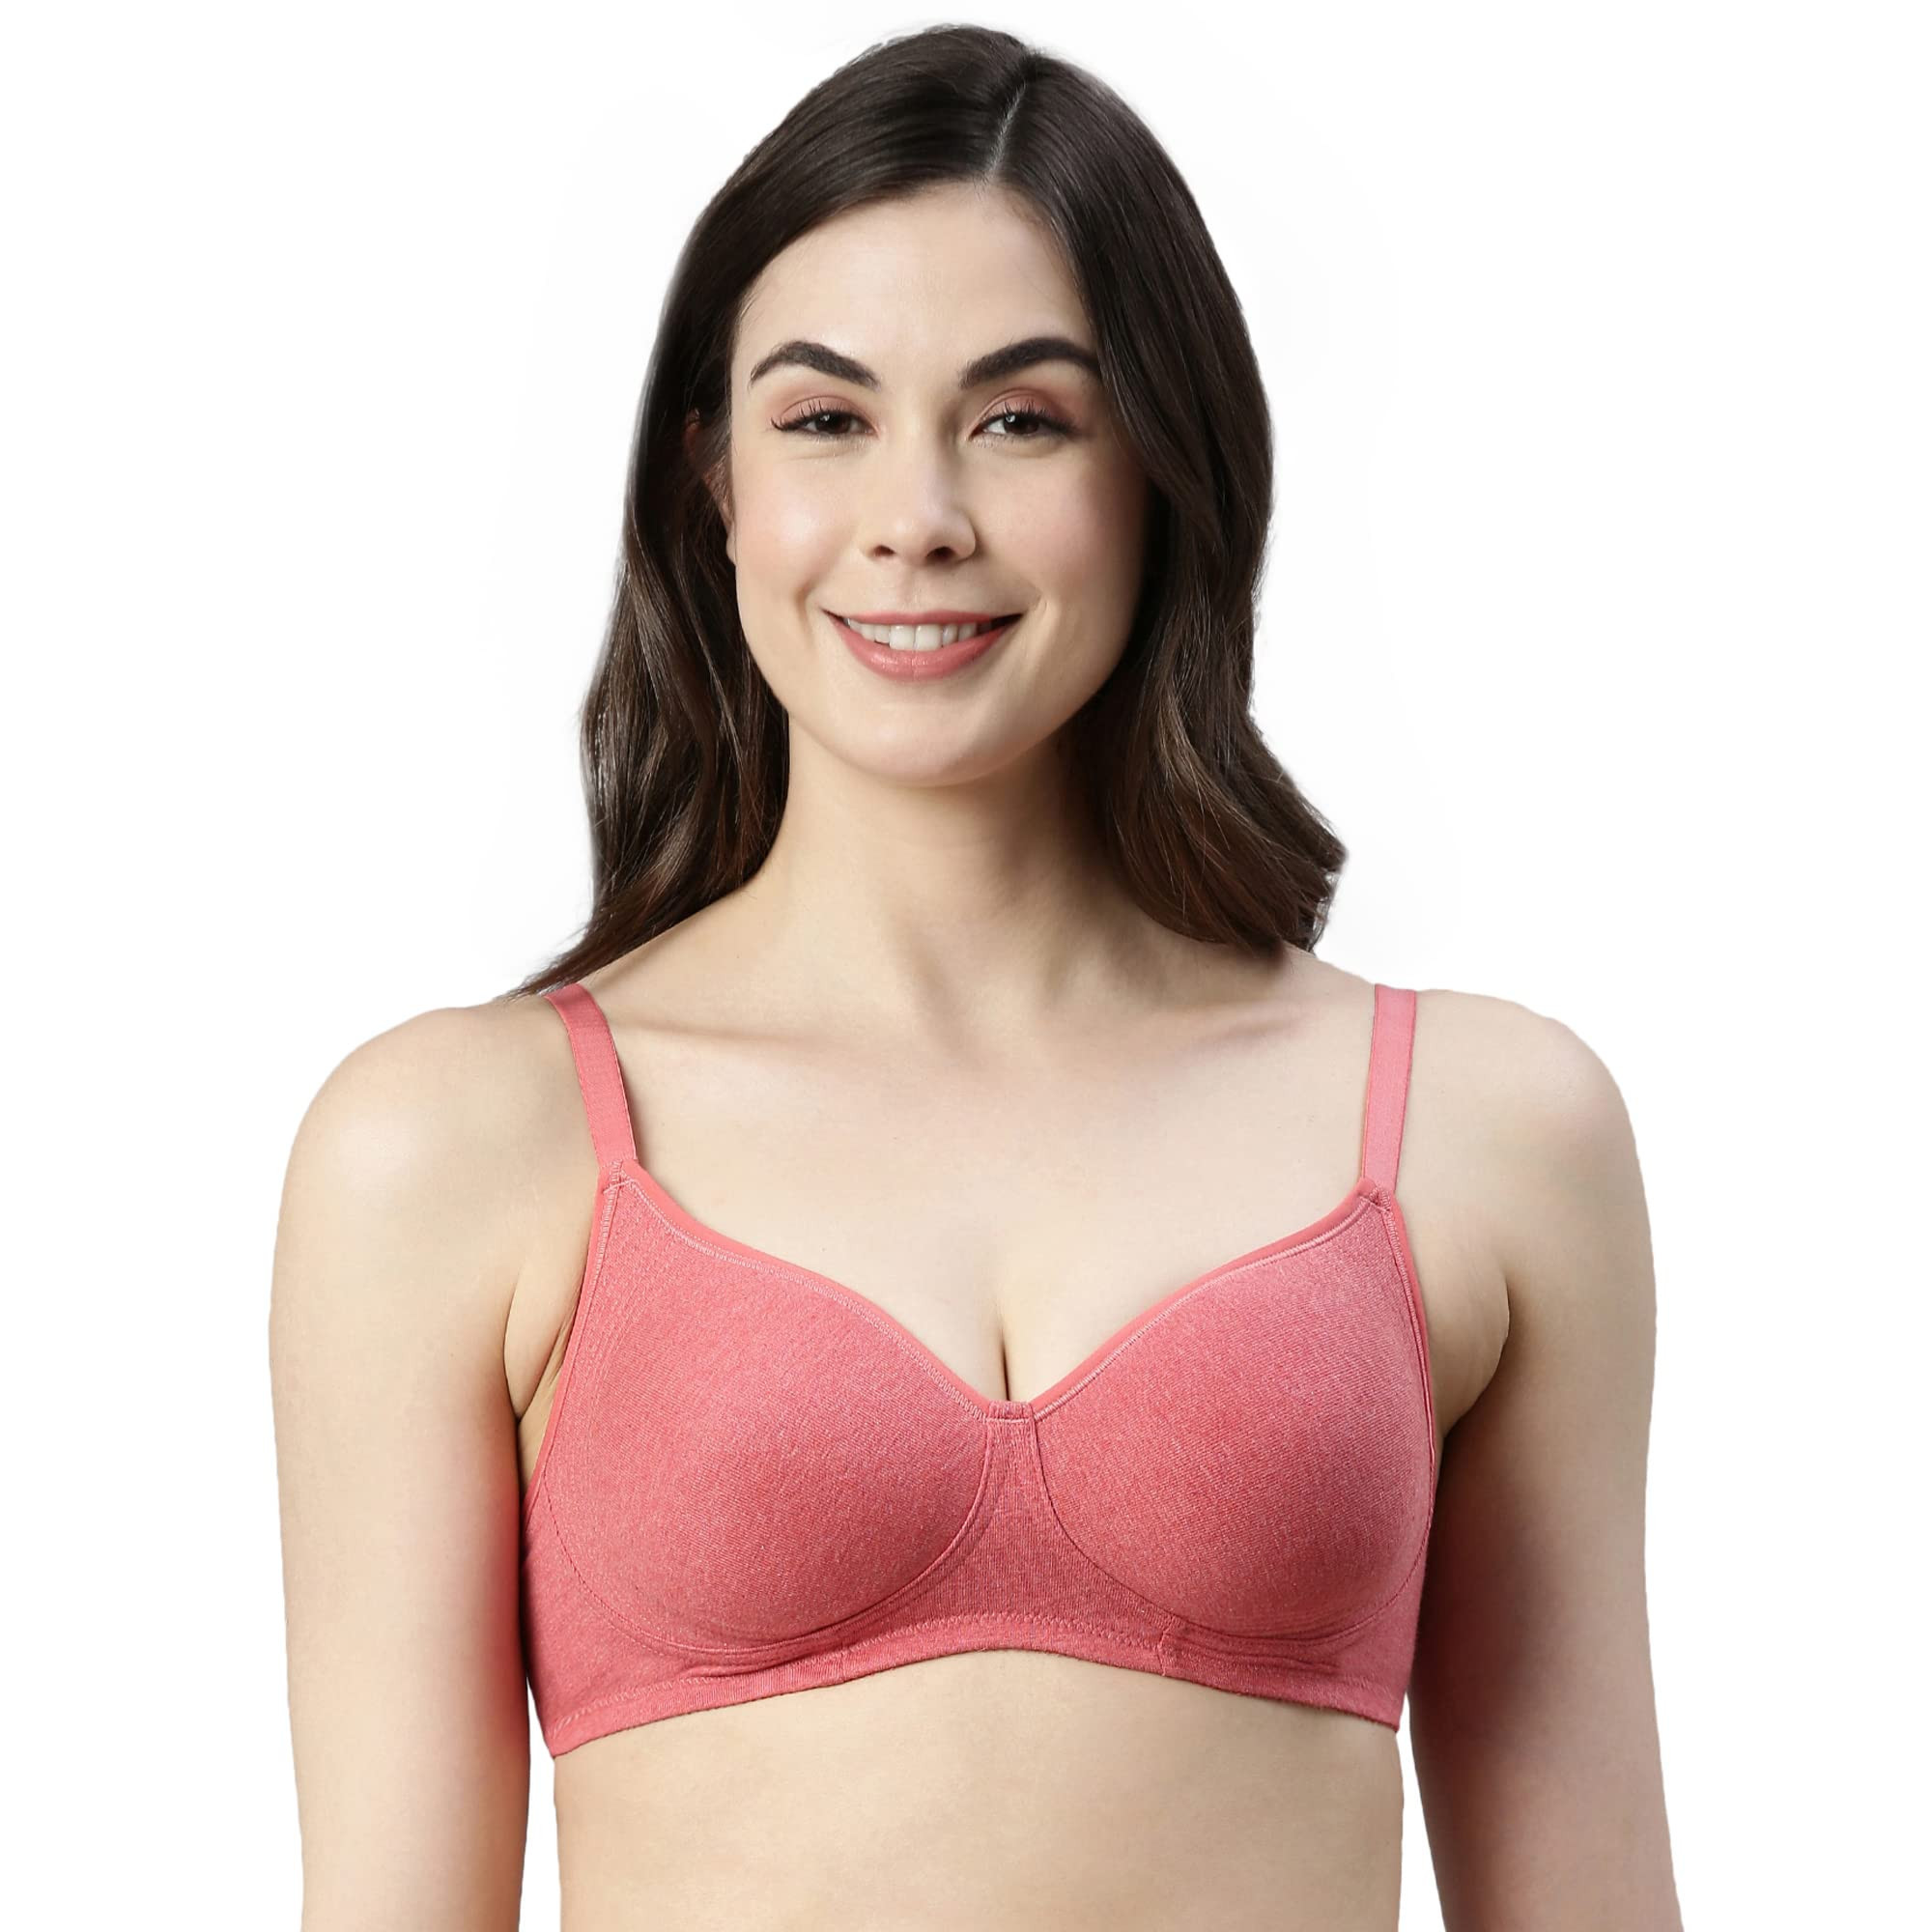 Enamor A042 Side Support Shaper Stretch Cotton Everyday Bra - Non